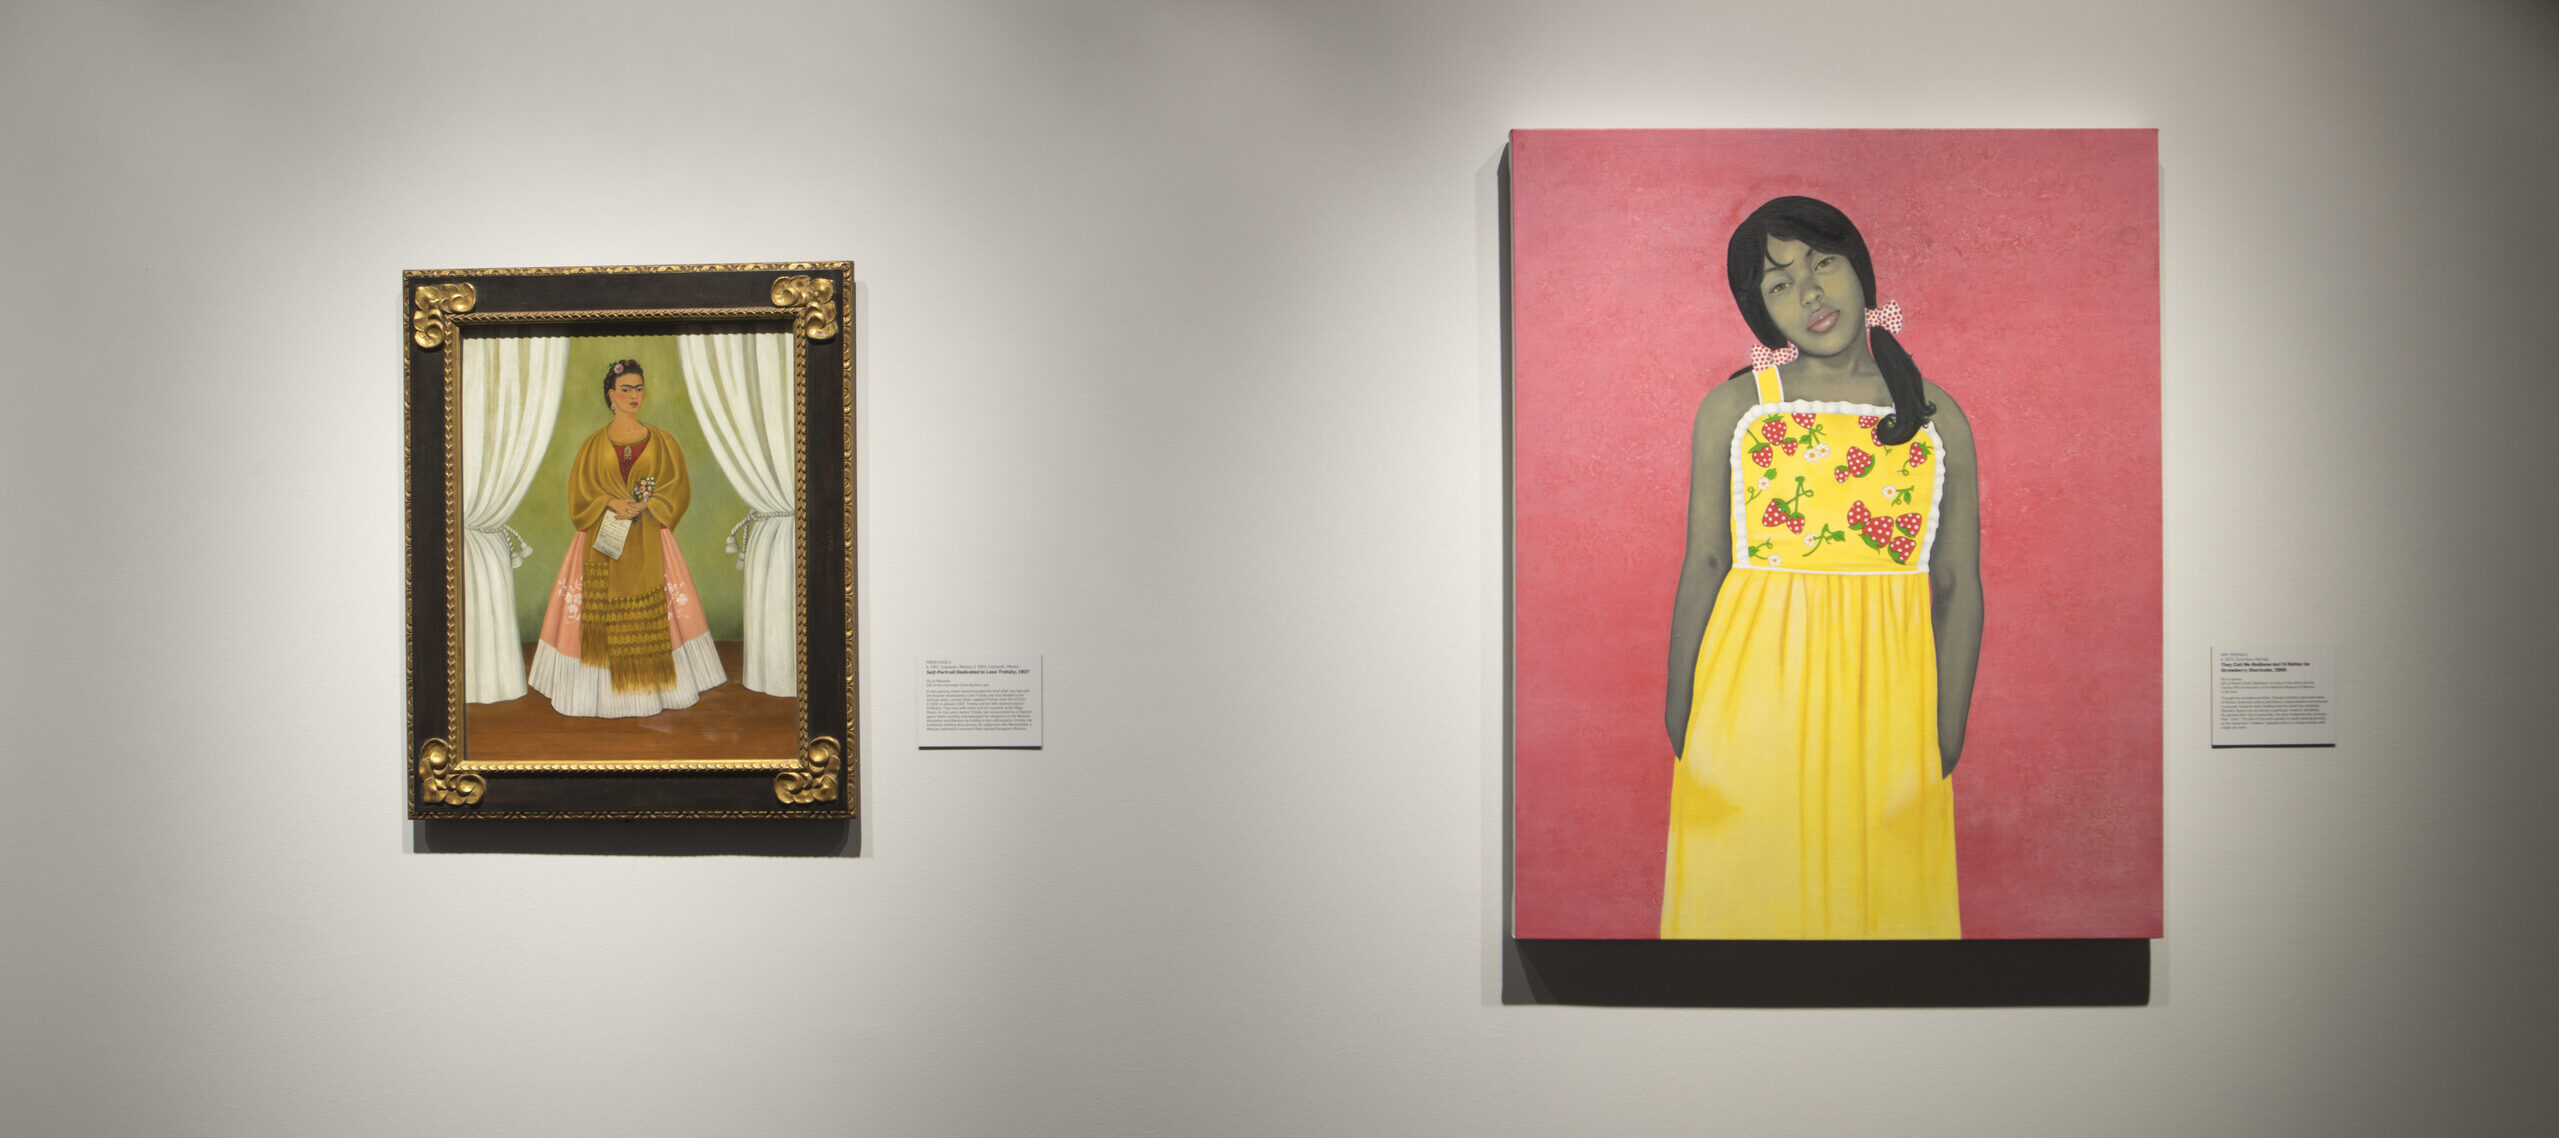 Two paintings are hanging on a white wall. On the left is a self-portrait of artist Frida Kahlo. She is wearing a pink dress and a yellow shawl, and is framed by two white curtains. The painting on the right is a portrait of a young girl with a gray skin tone wearing a yellow dress with strawberries.